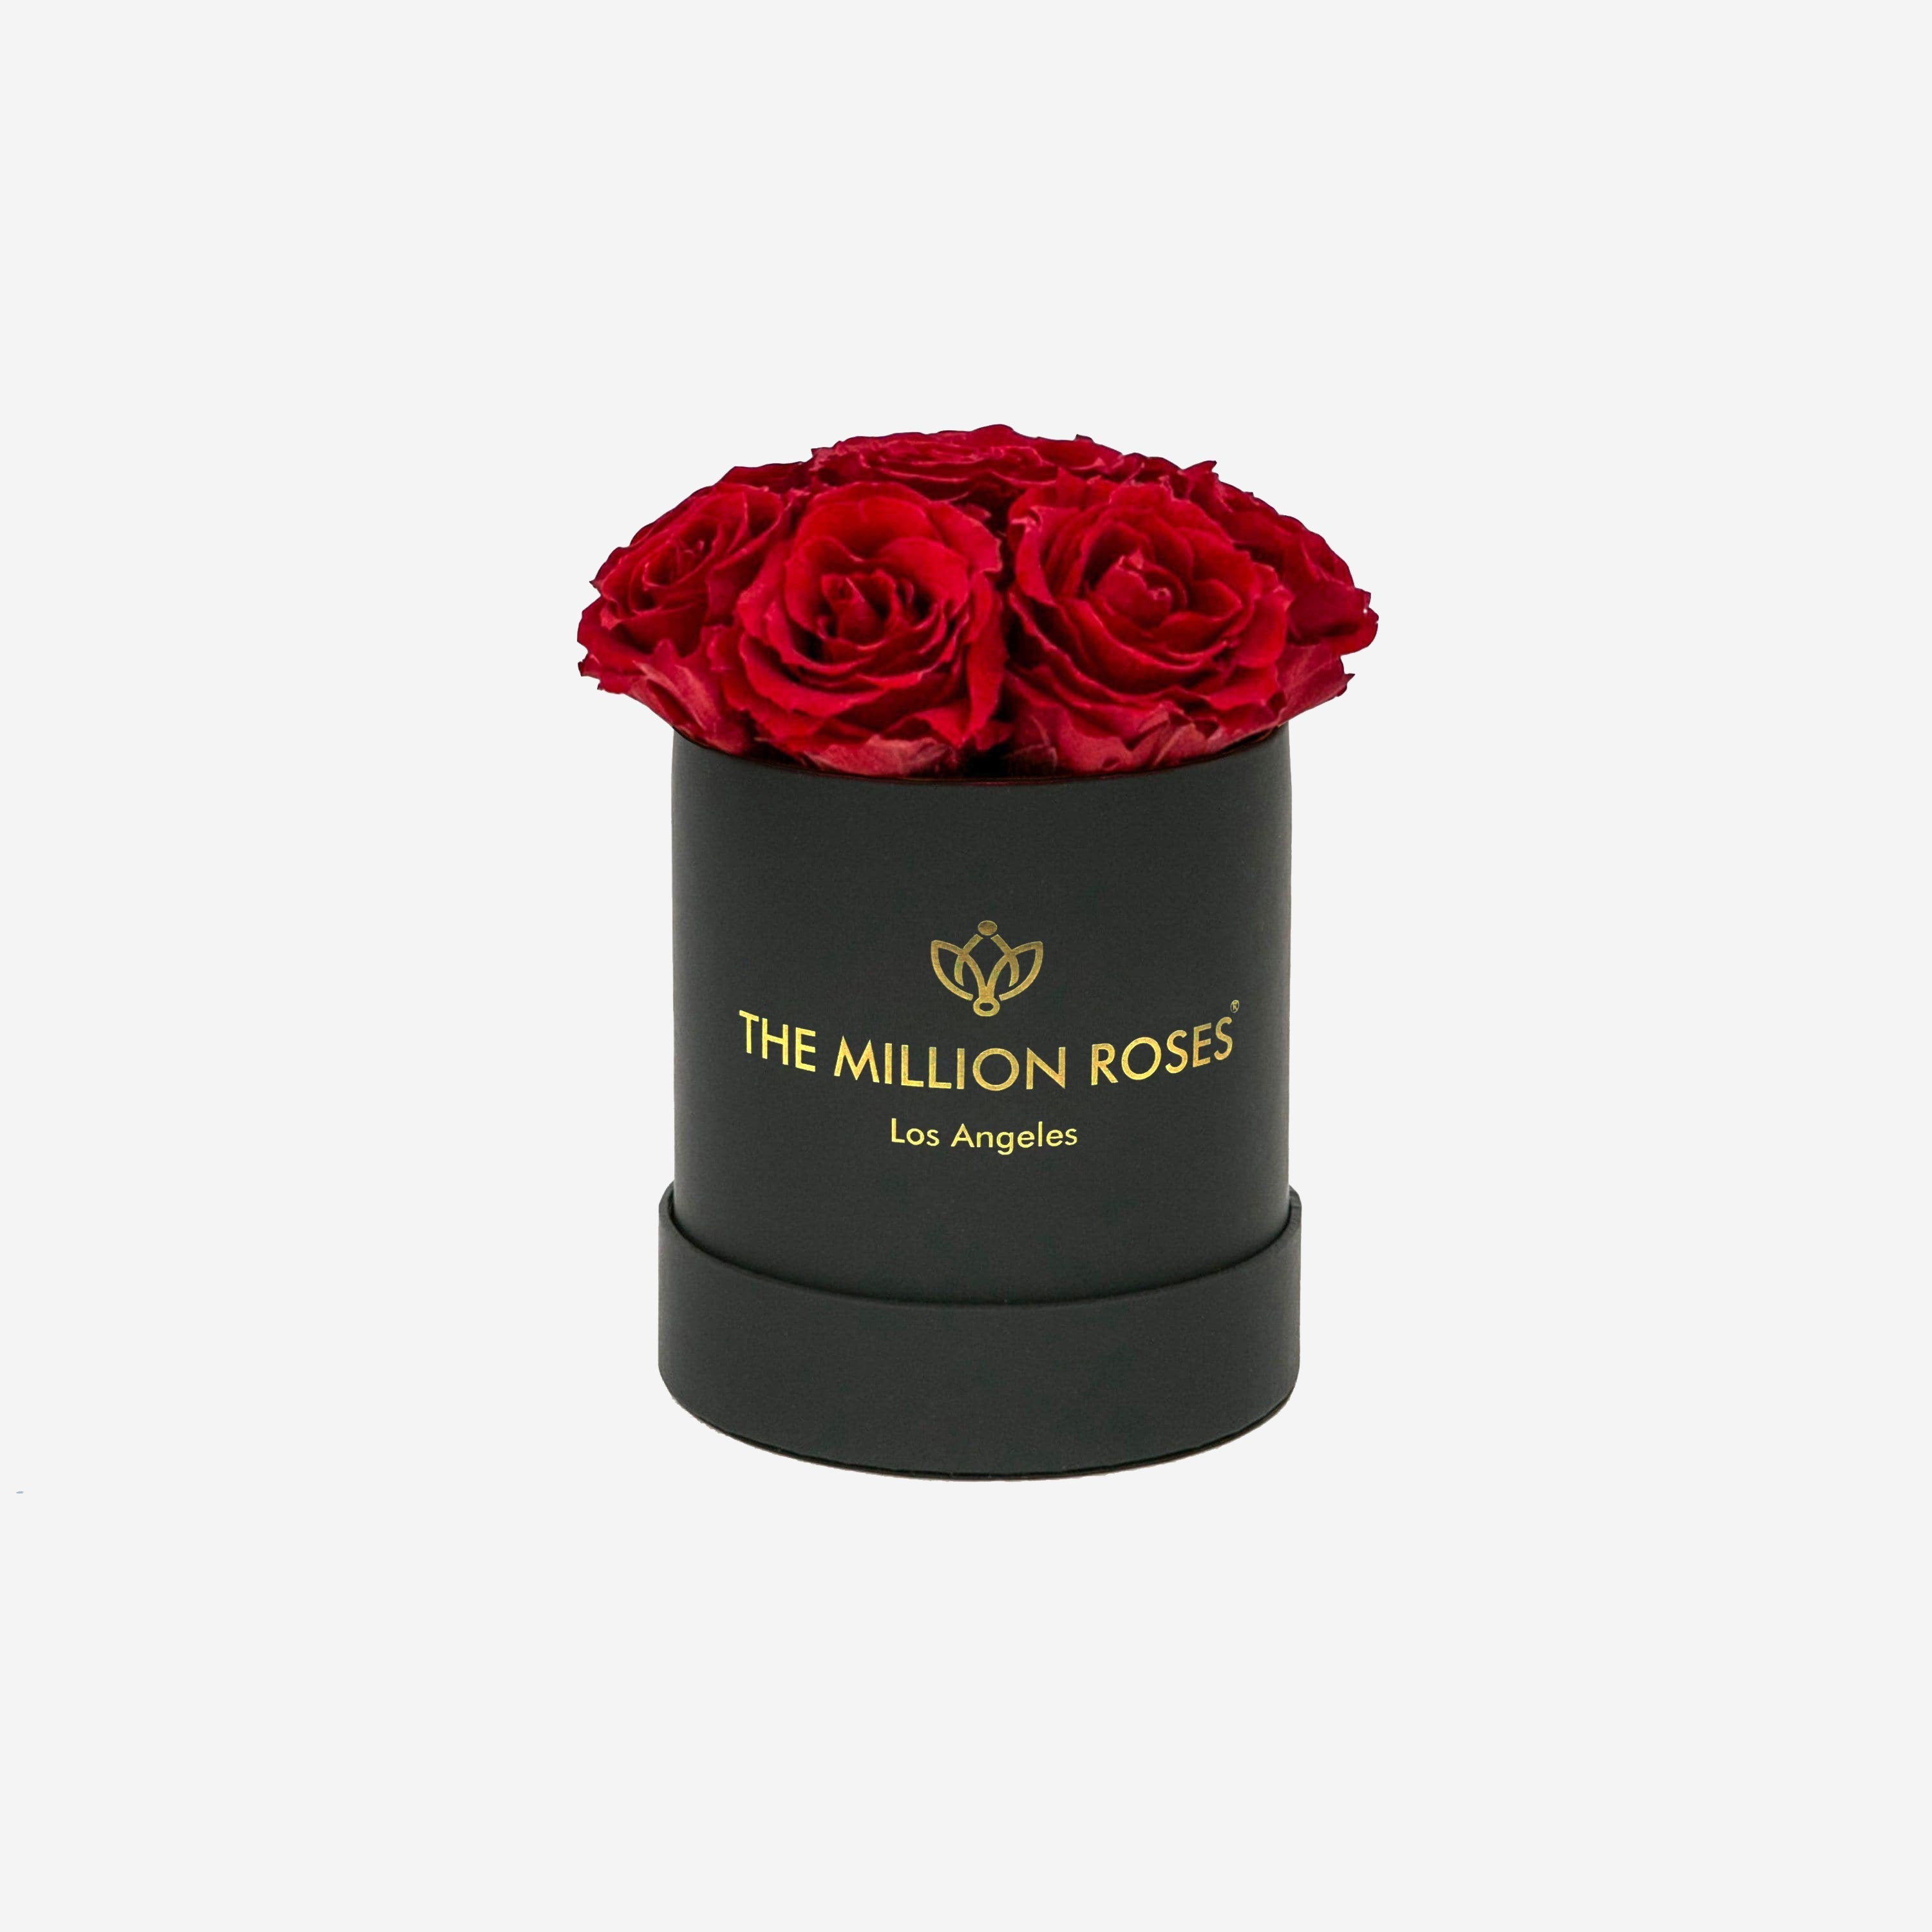 50 Premium Red Roses Wrapped with Rose Petals in Los Angeles, CA